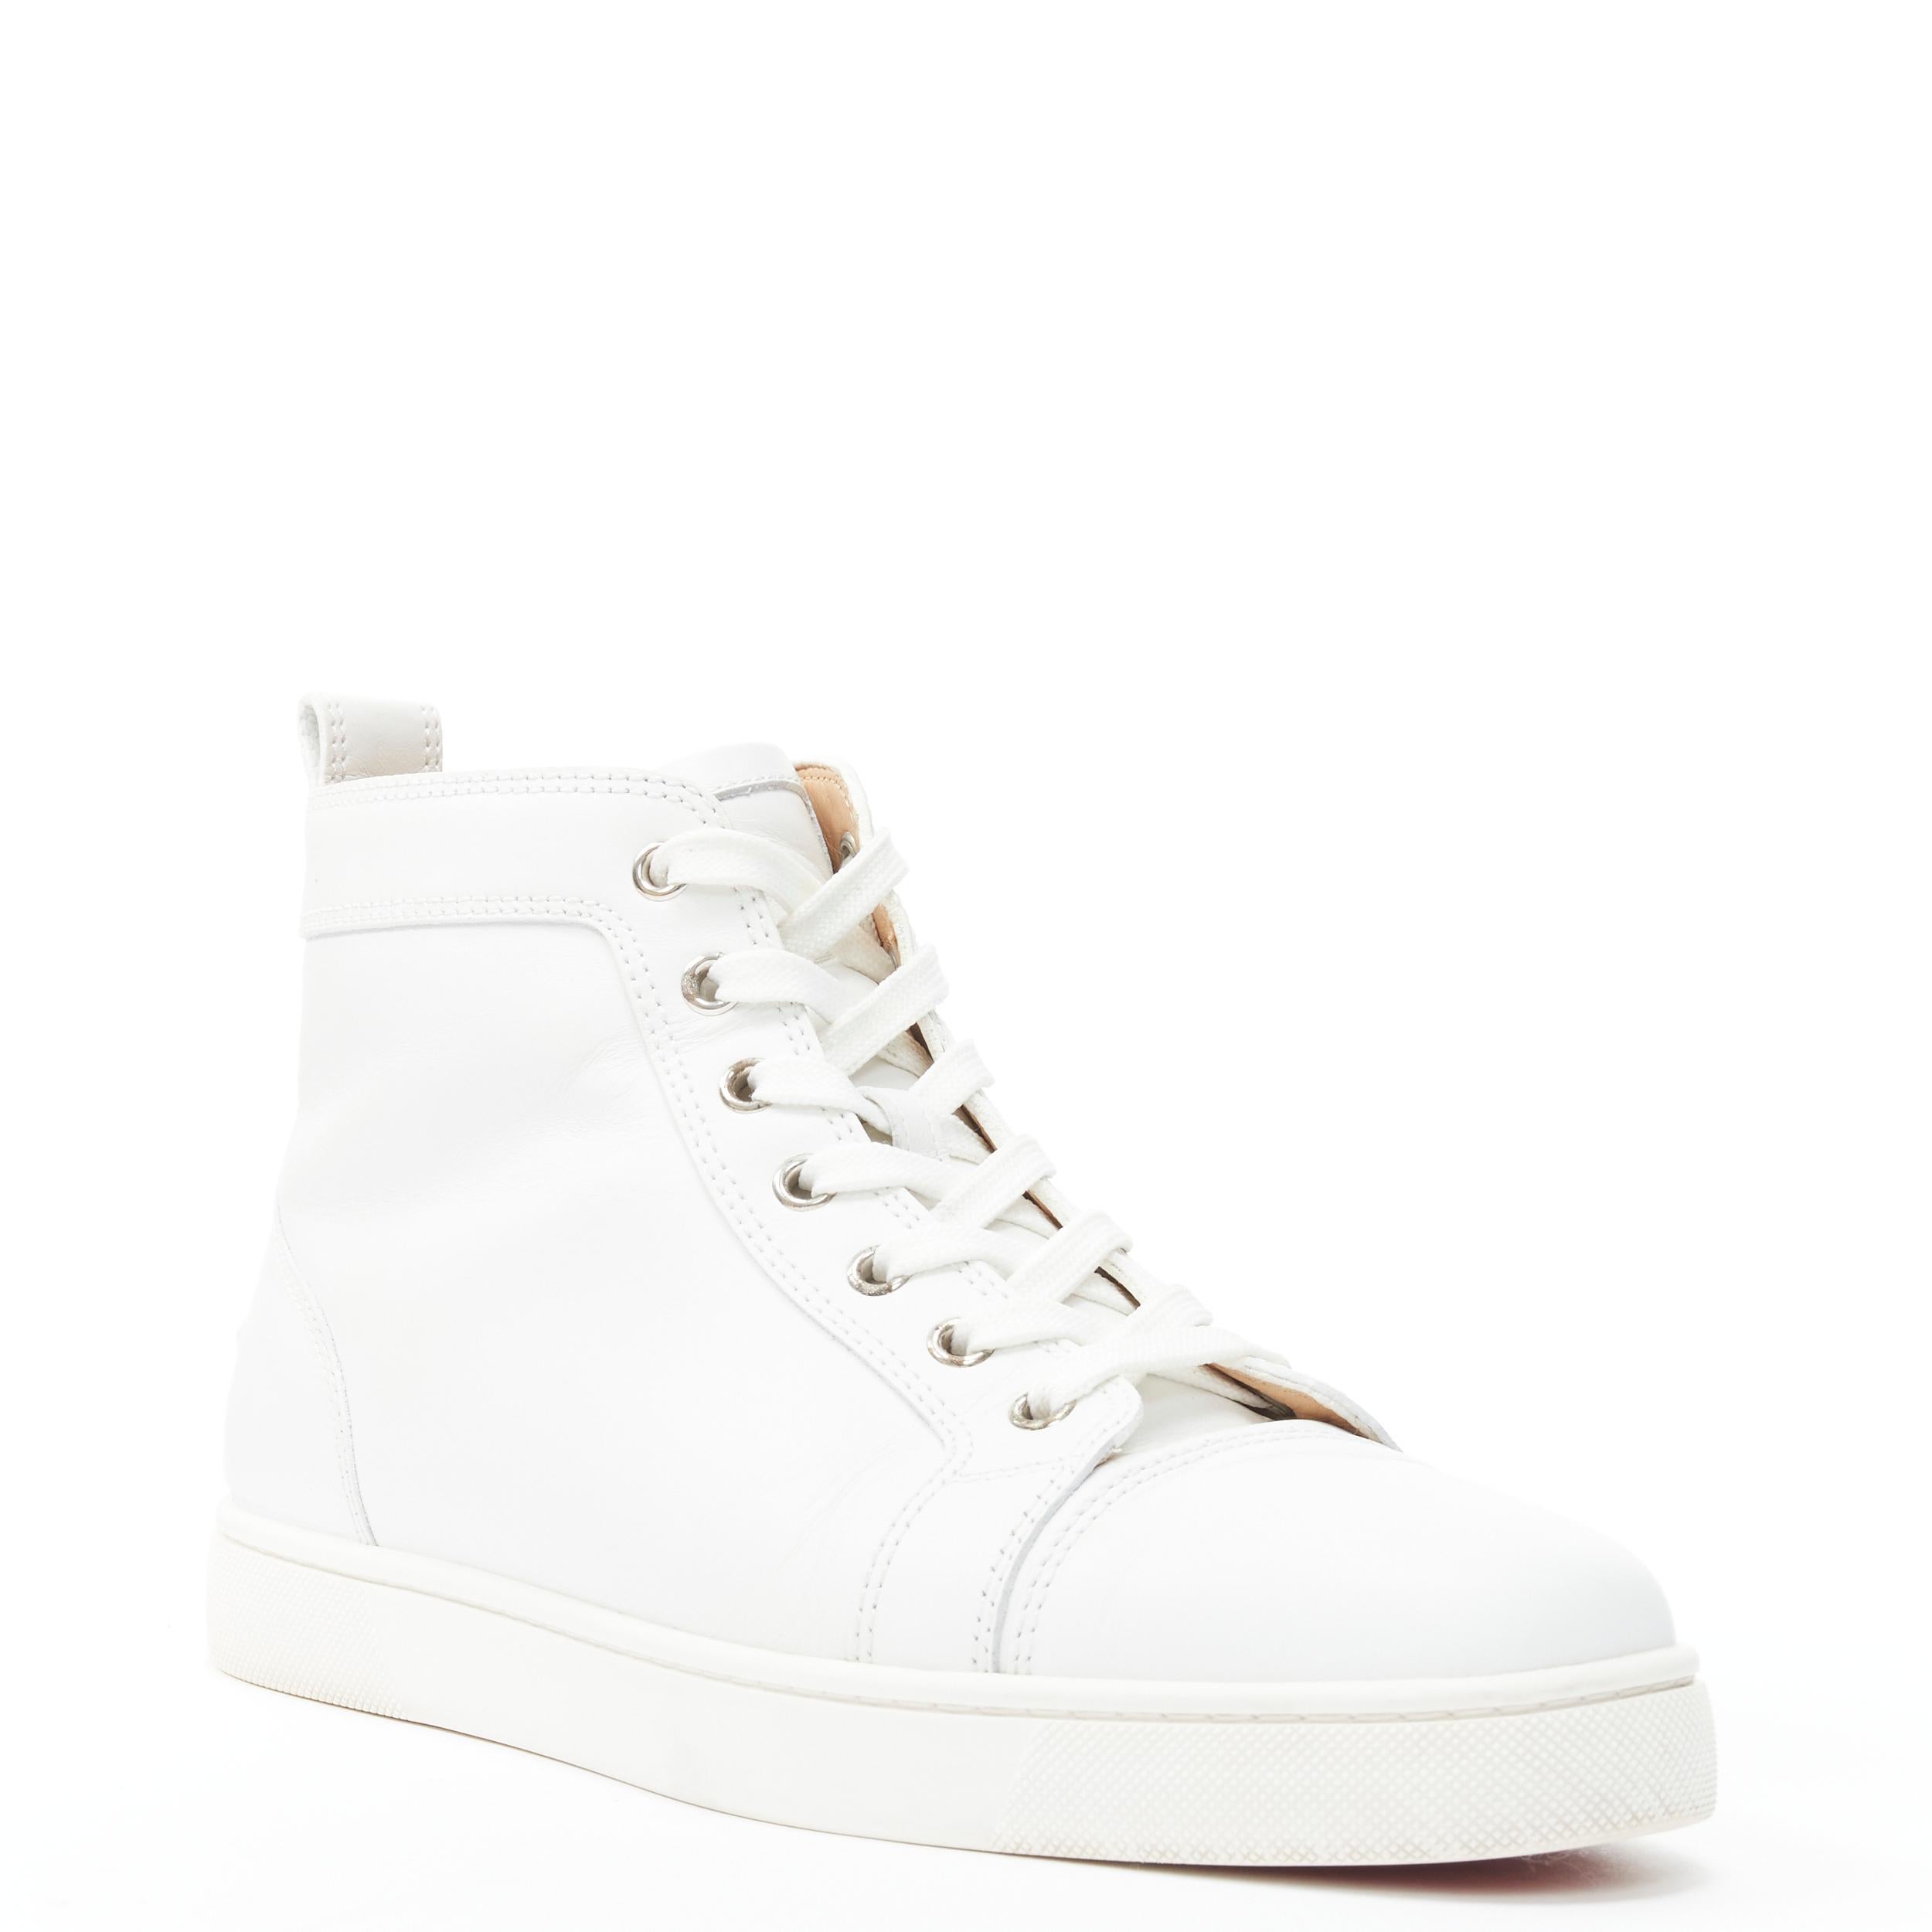 CHRISTIAN LOUBOUTIN Louis logo emblem white leather minimal hi top sneaker EU40 Reference: TGAS/B01814 
Brand: Christian Louboutin 
Designer: Christian Louboutin 
Model: Louis 
Material: Leather 
Color: White 
Pattern: Solid 
Closure: Lace Up 
Made